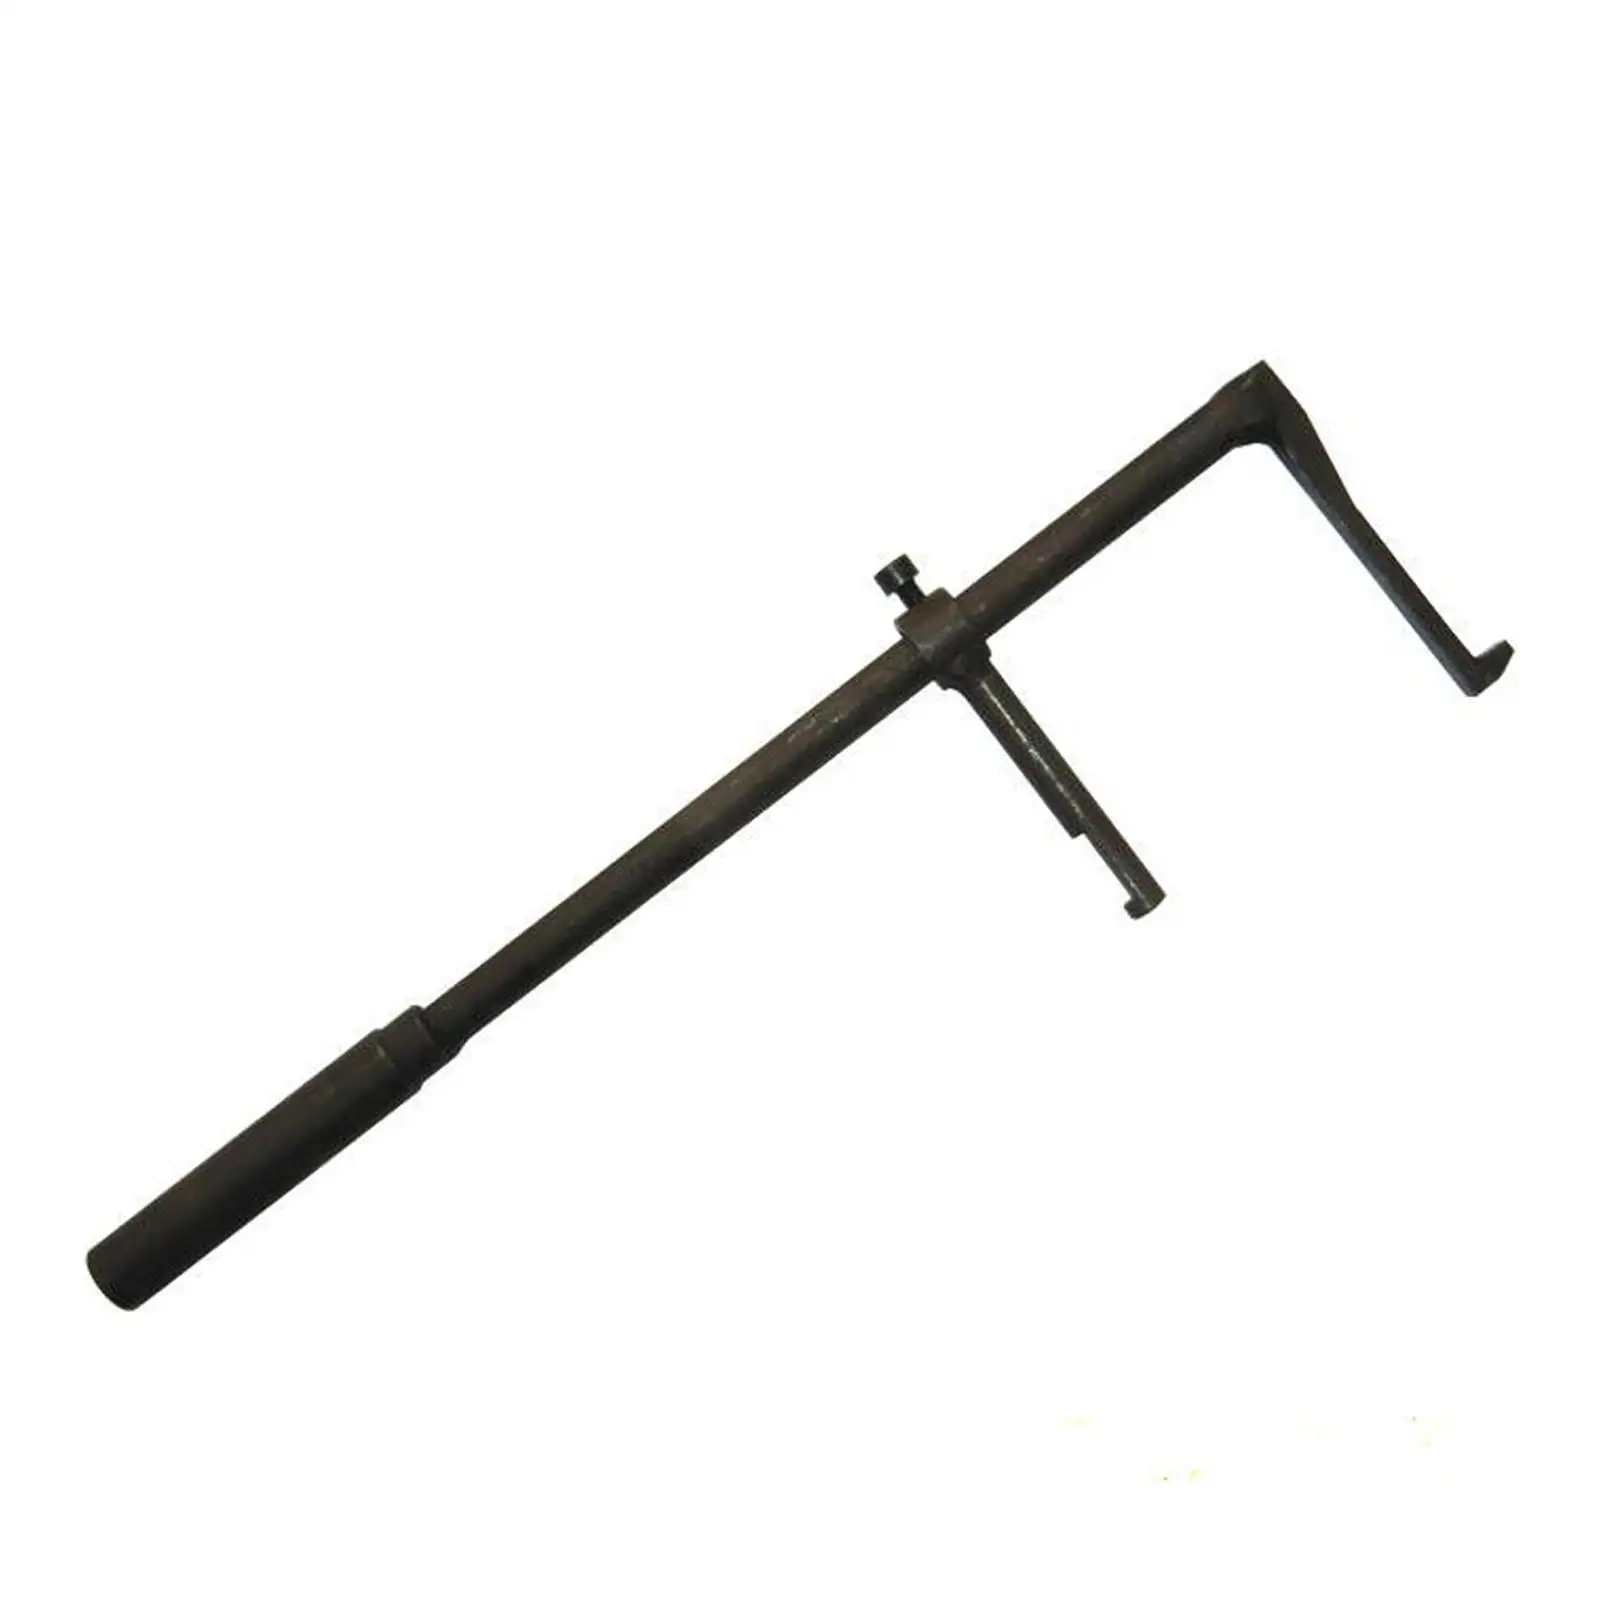 Front Fork Oil Seal Puller Remover Install Tool for  Motorbike Durable